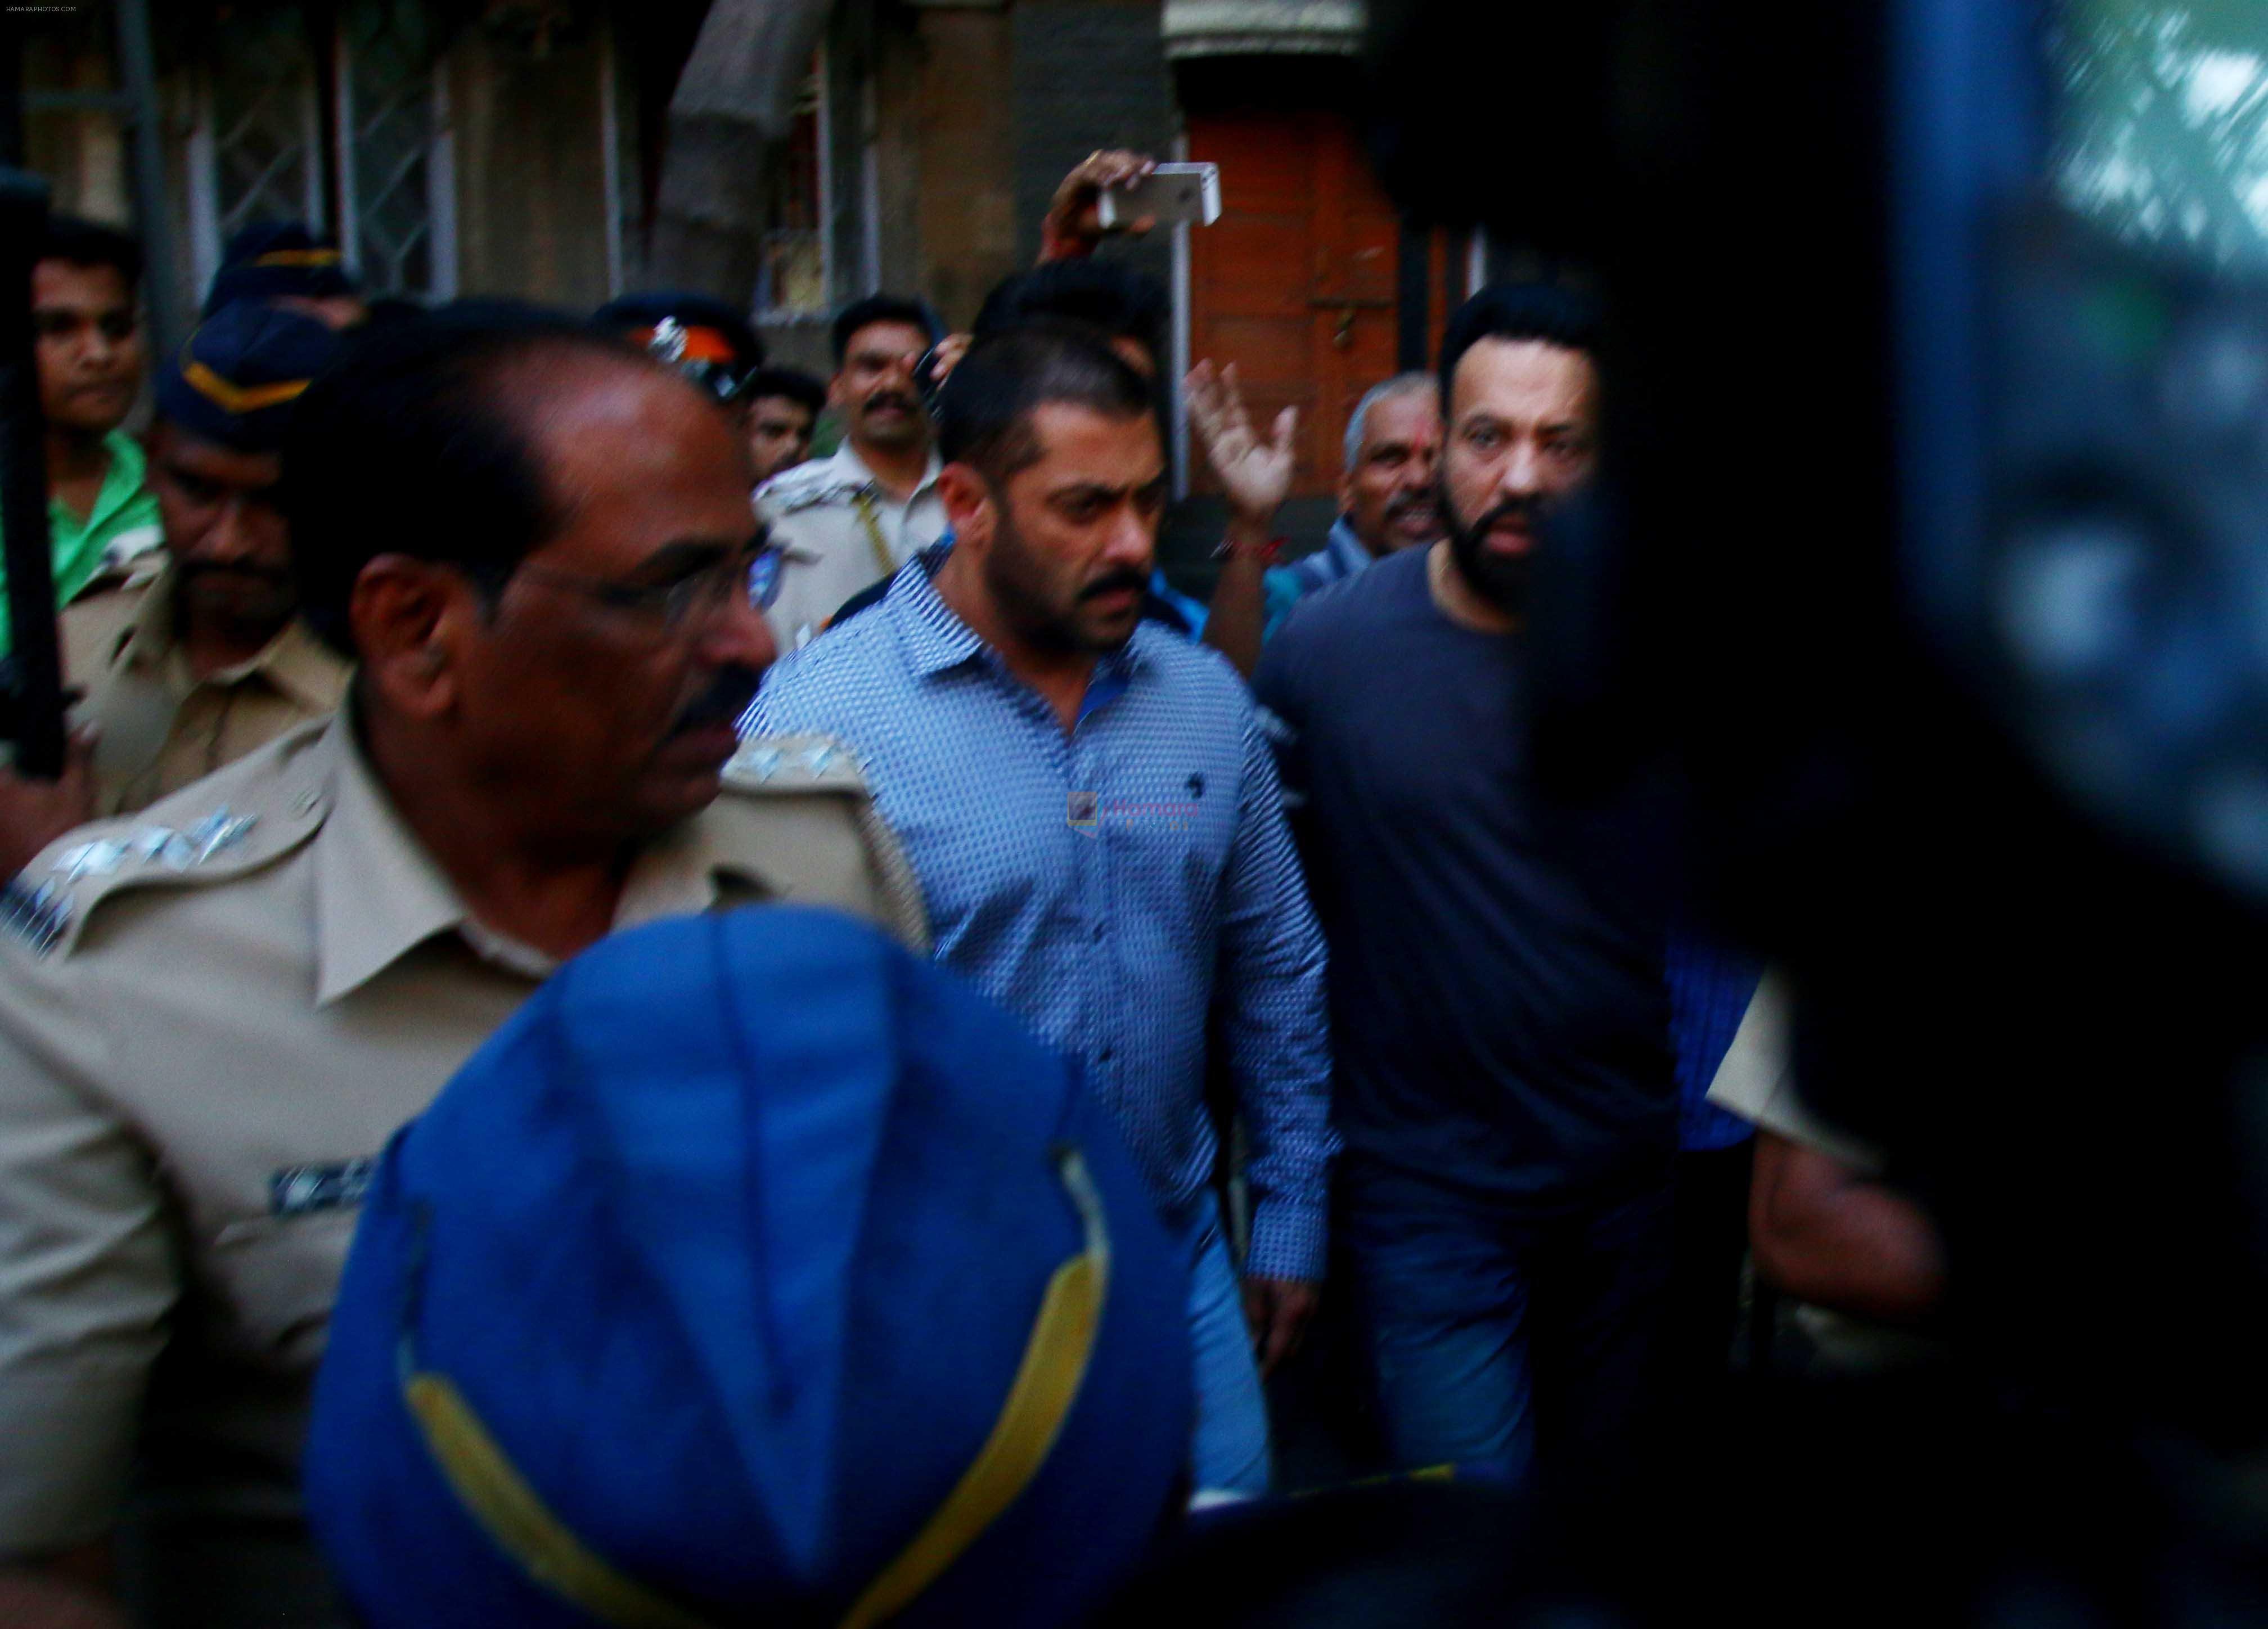 Salman Khan snapped at the court on 10th Dec 2015